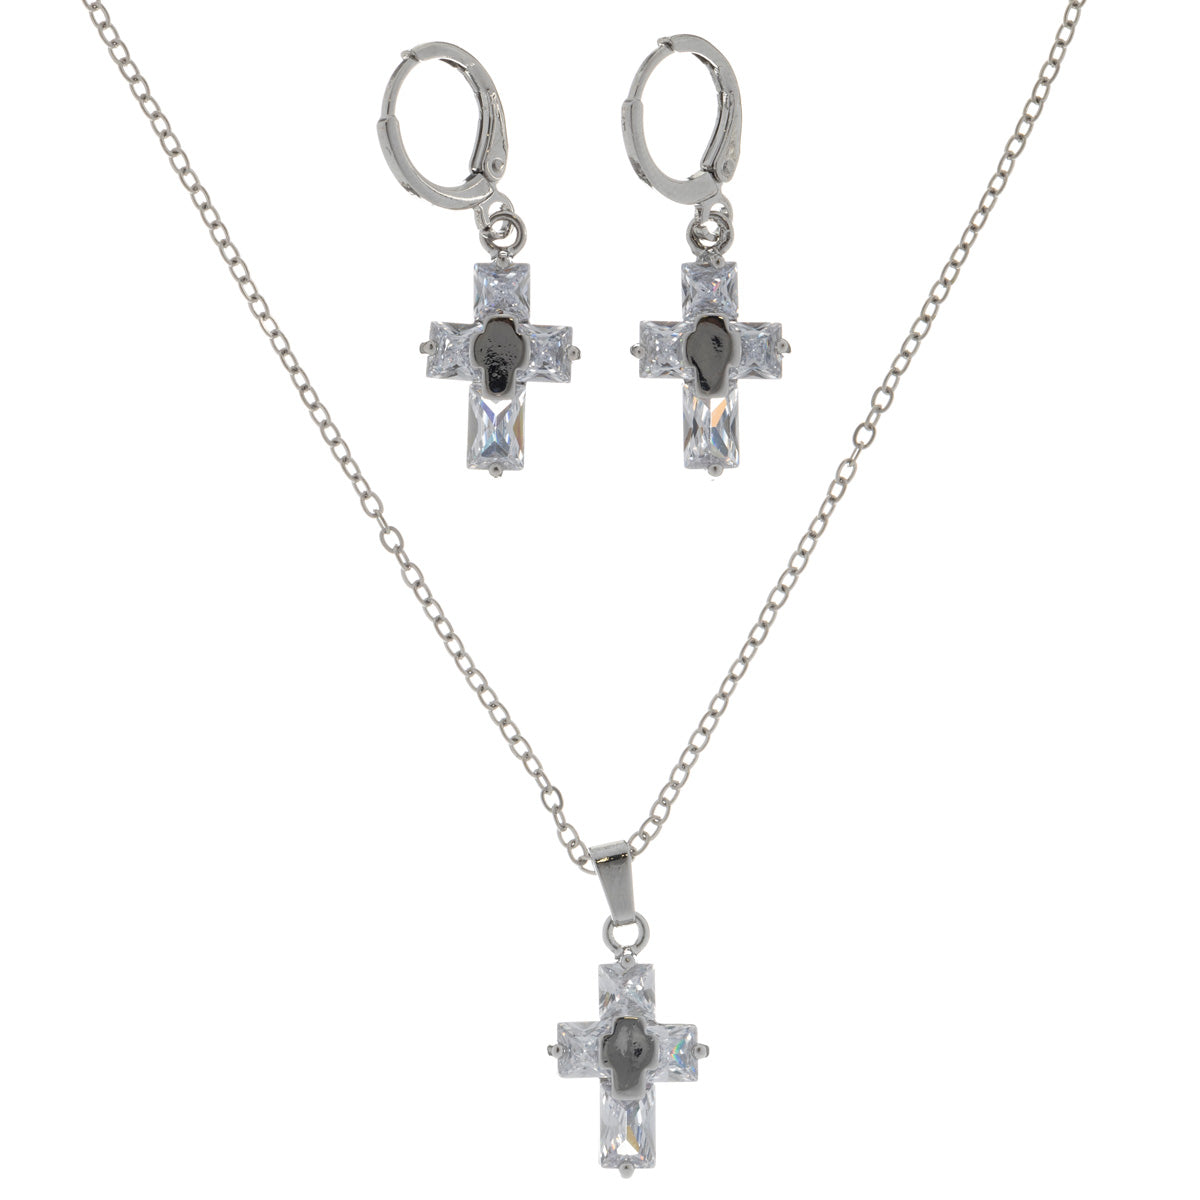 Cross necklace and earrings set in a gift box